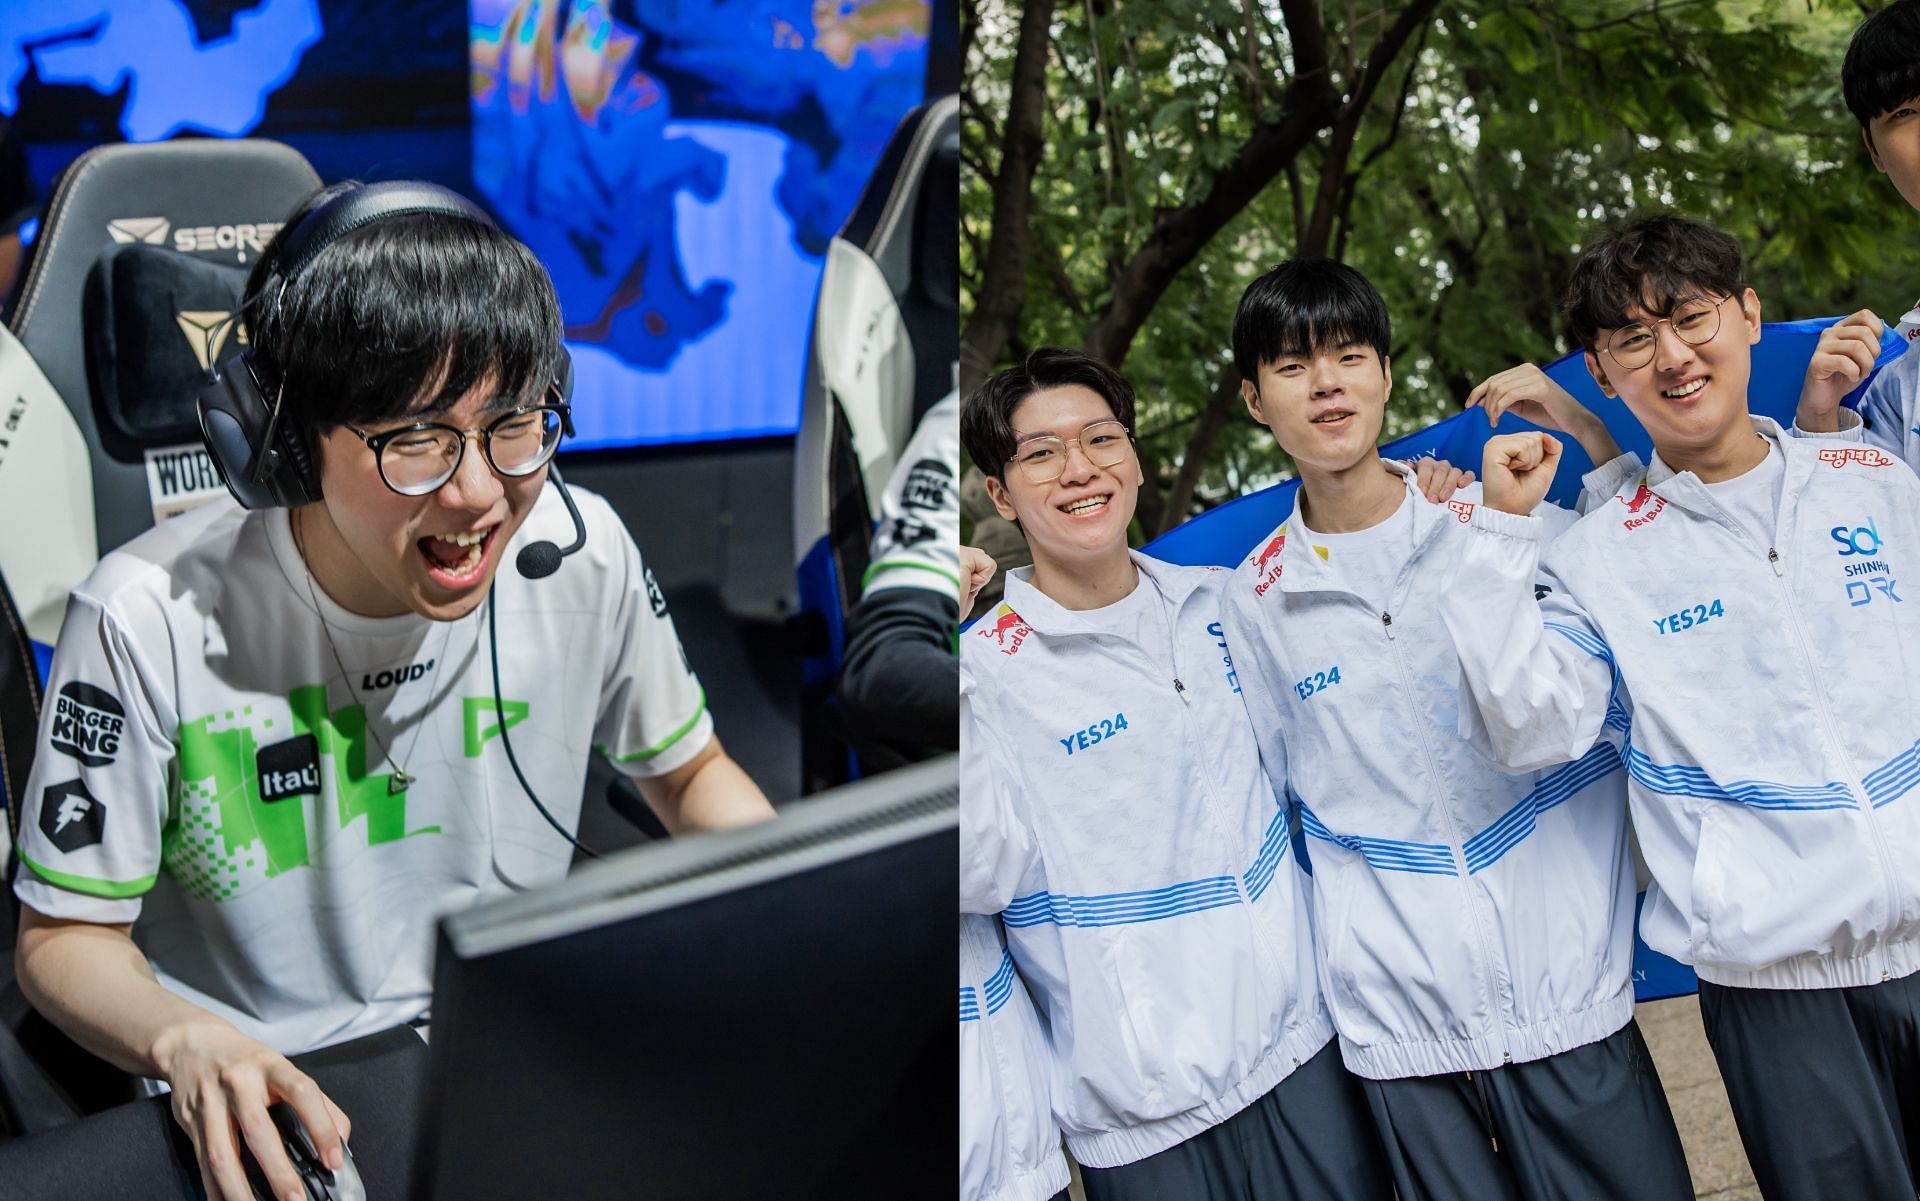 Loud and DRX have been the stars of day 3 at Worlds 2022 (Image via Riot Games)